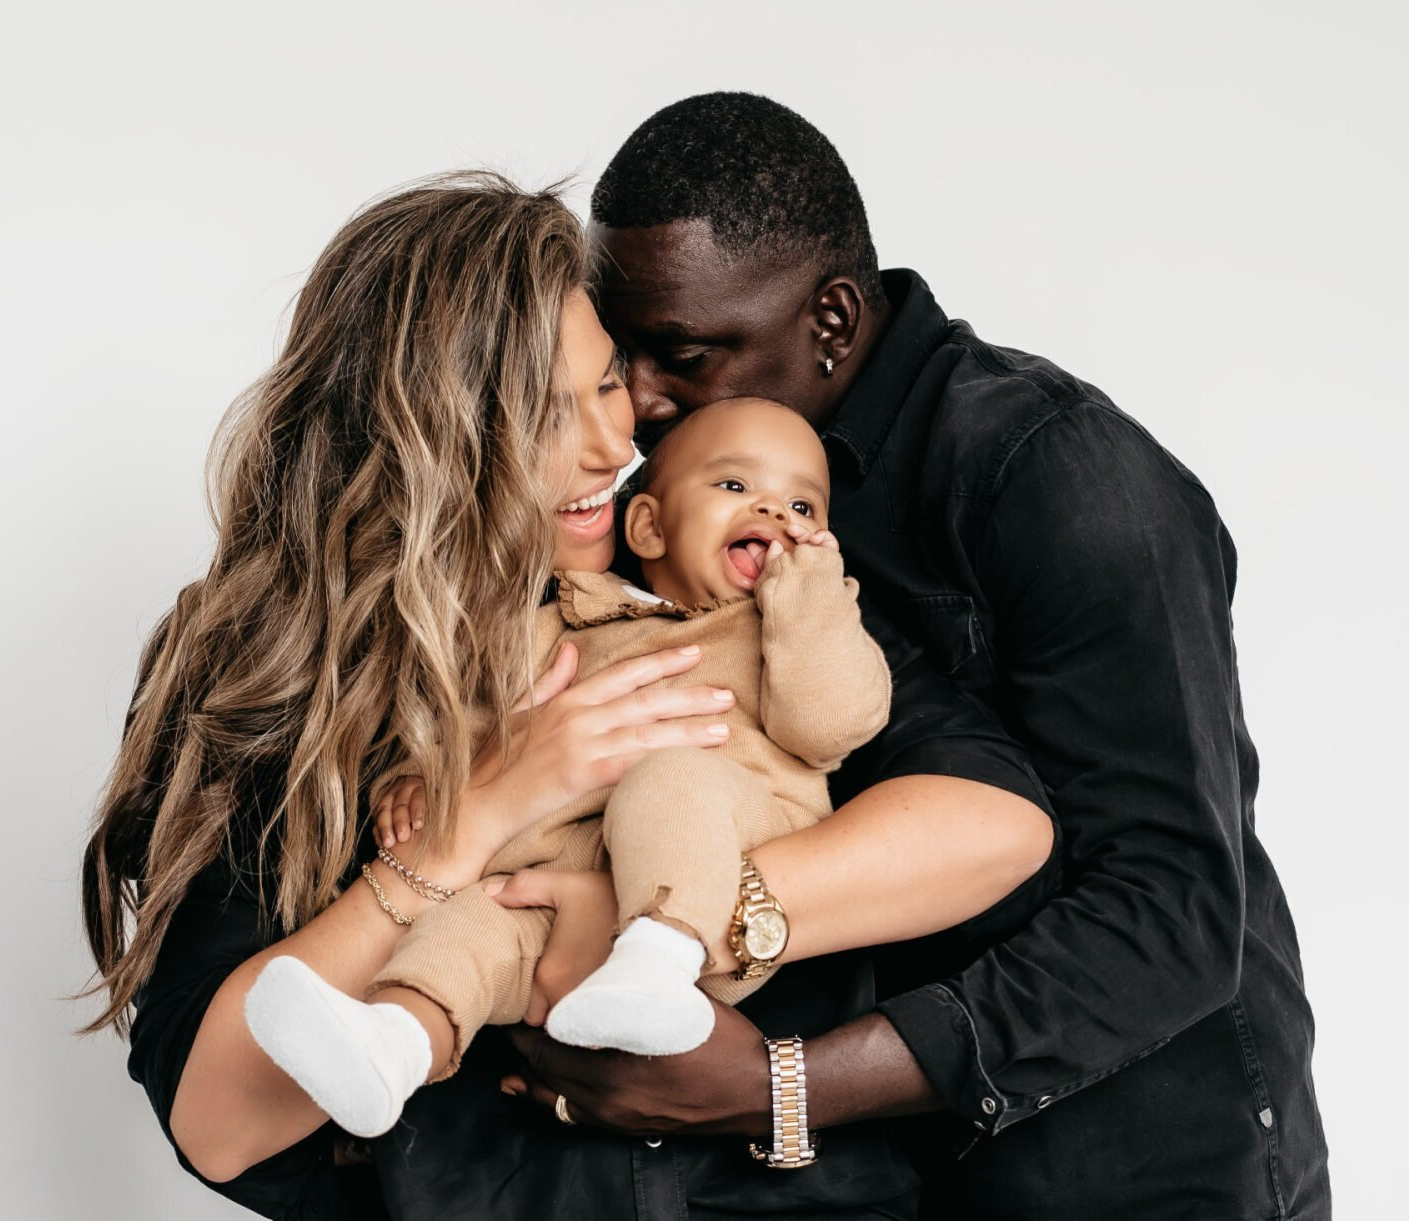 Photo of mom and dad embraced and holding baby for family photography